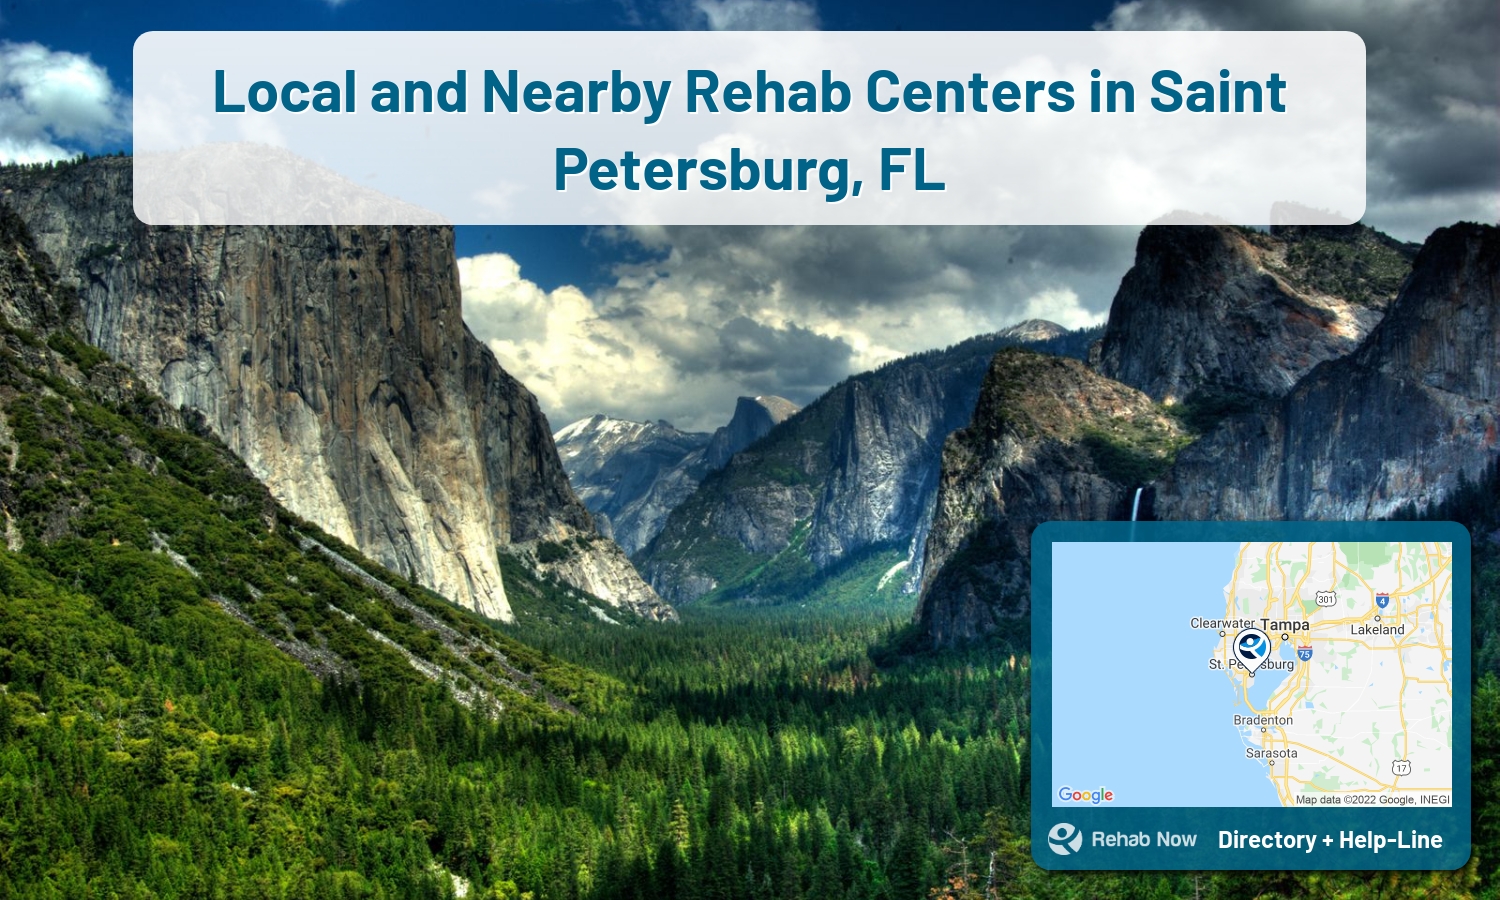 Saint Petersburg, FL Treatment Centers. Find drug rehab in Saint Petersburg, Florida, or detox and treatment programs. Get the right help now!